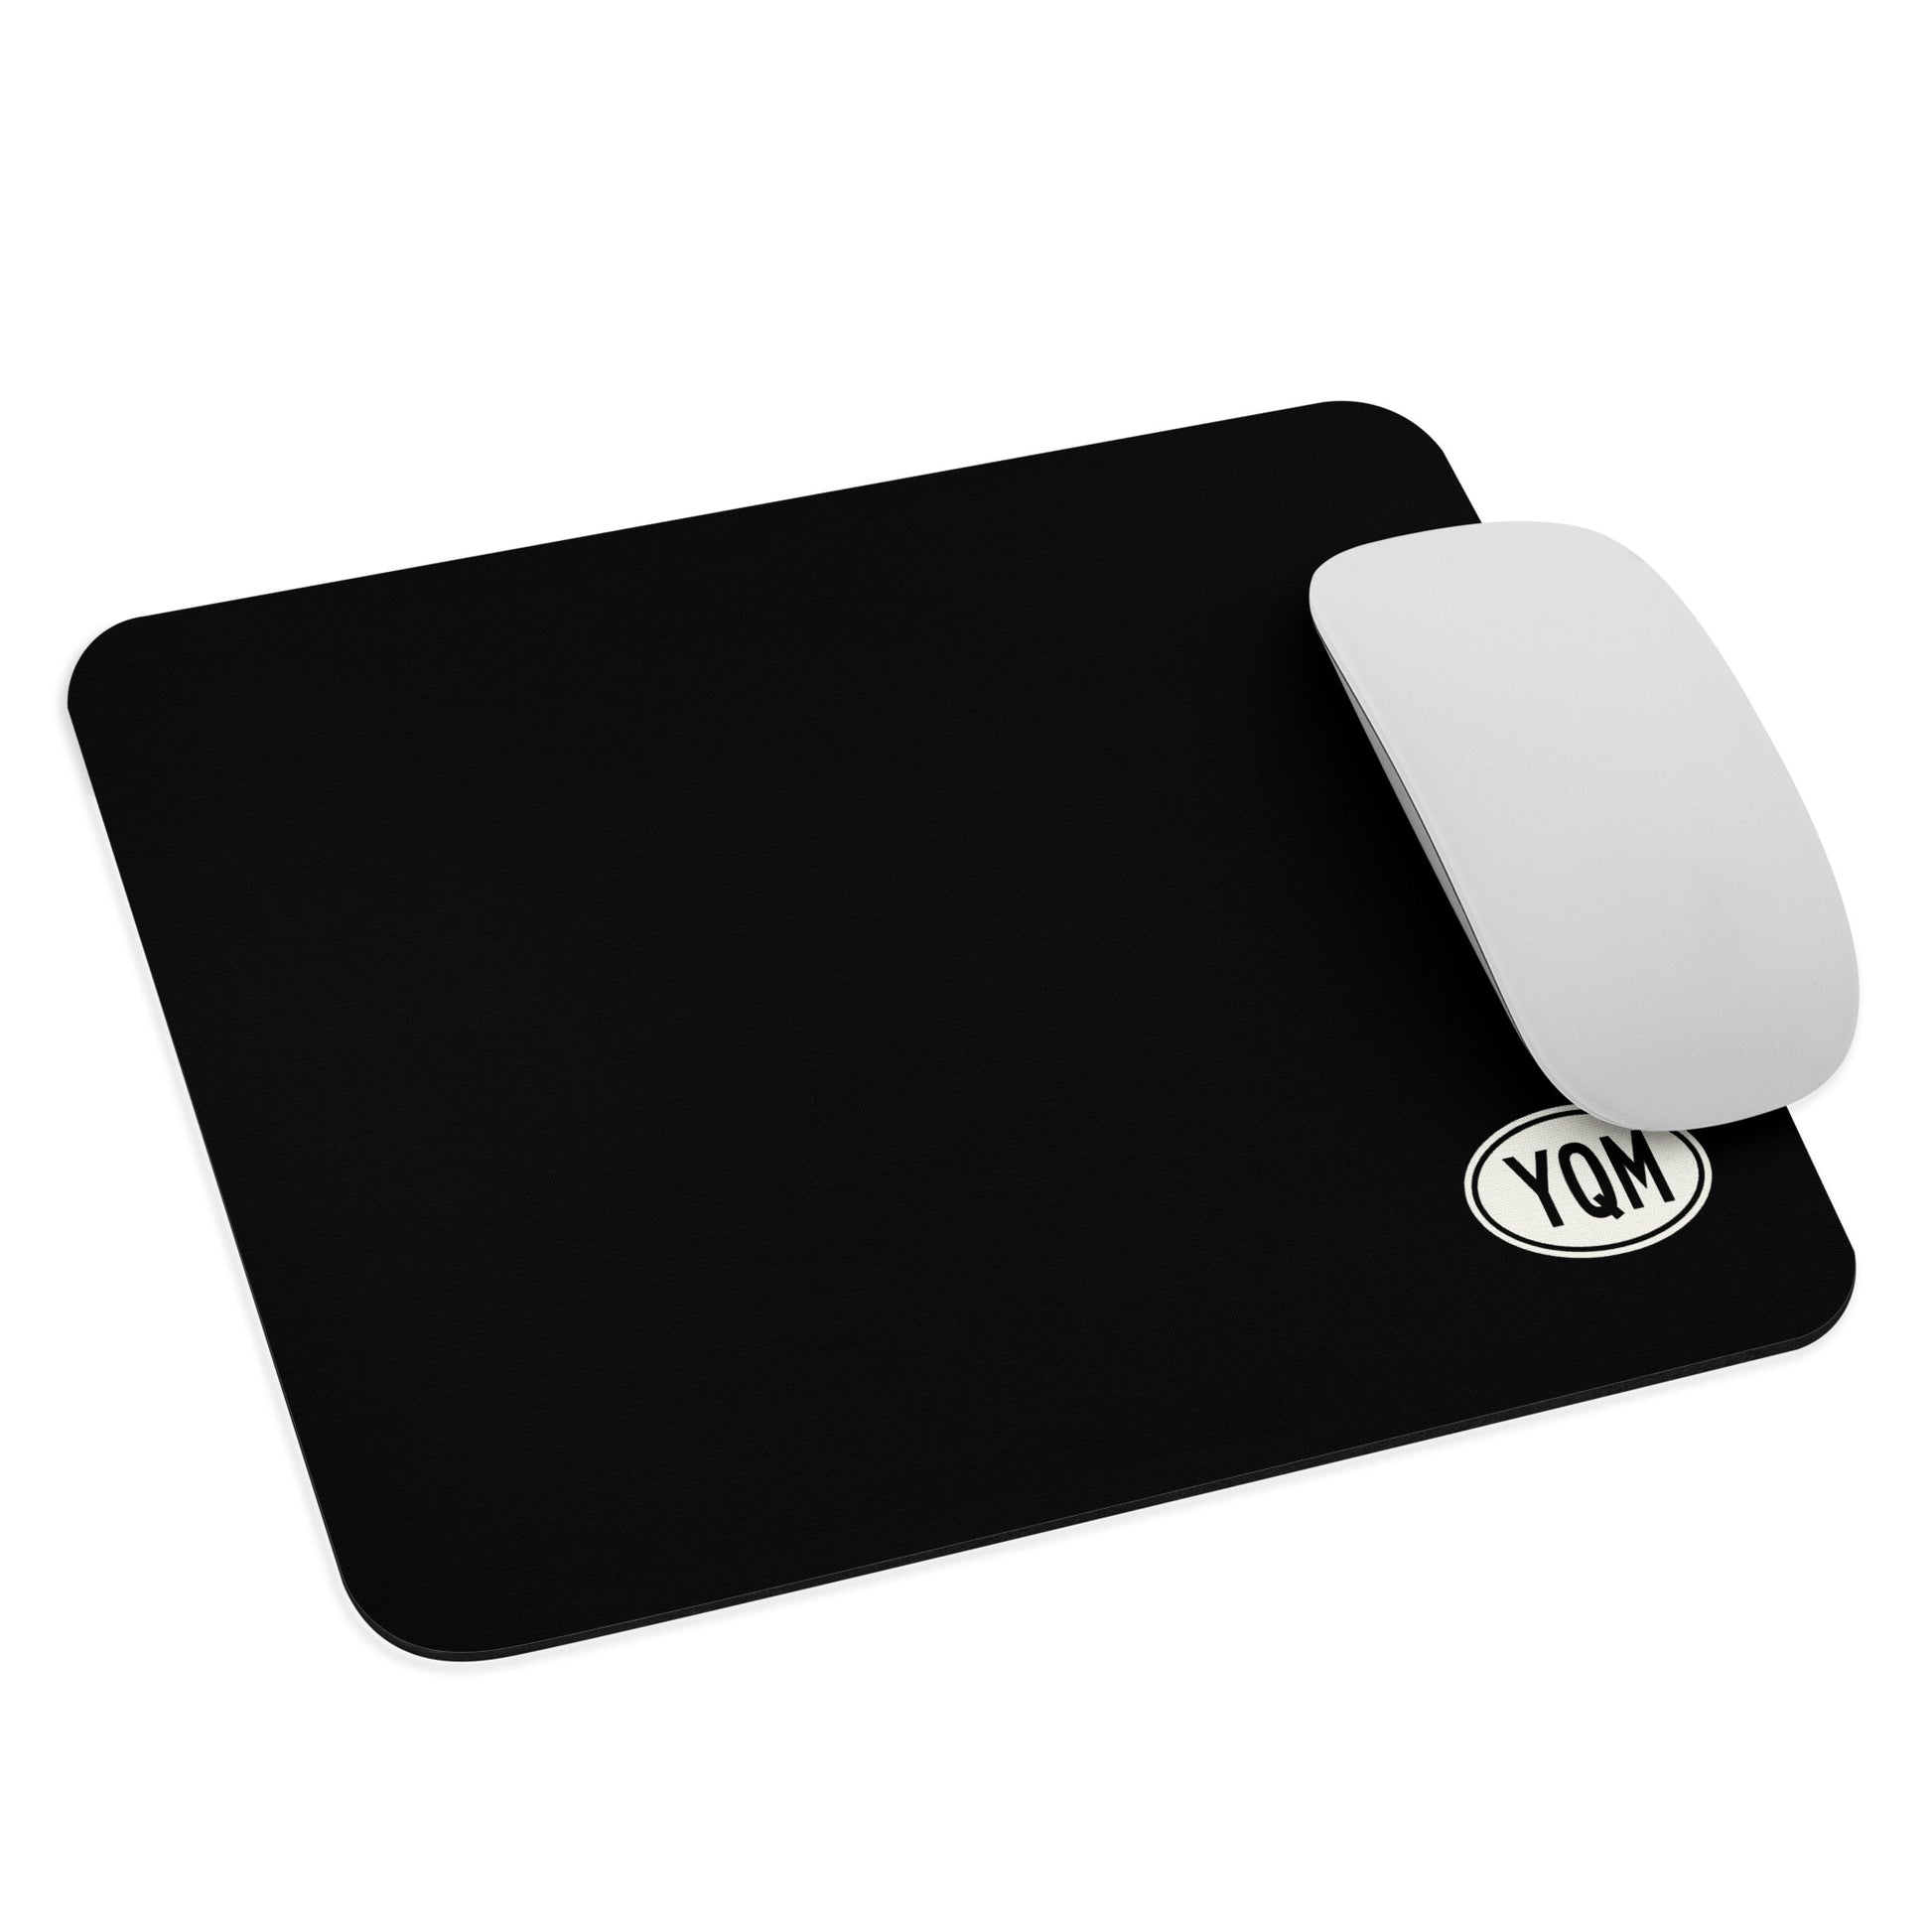 Unique Travel Gift Mouse Pad - White Oval • YQM Moncton • YHM Designs - Image 03